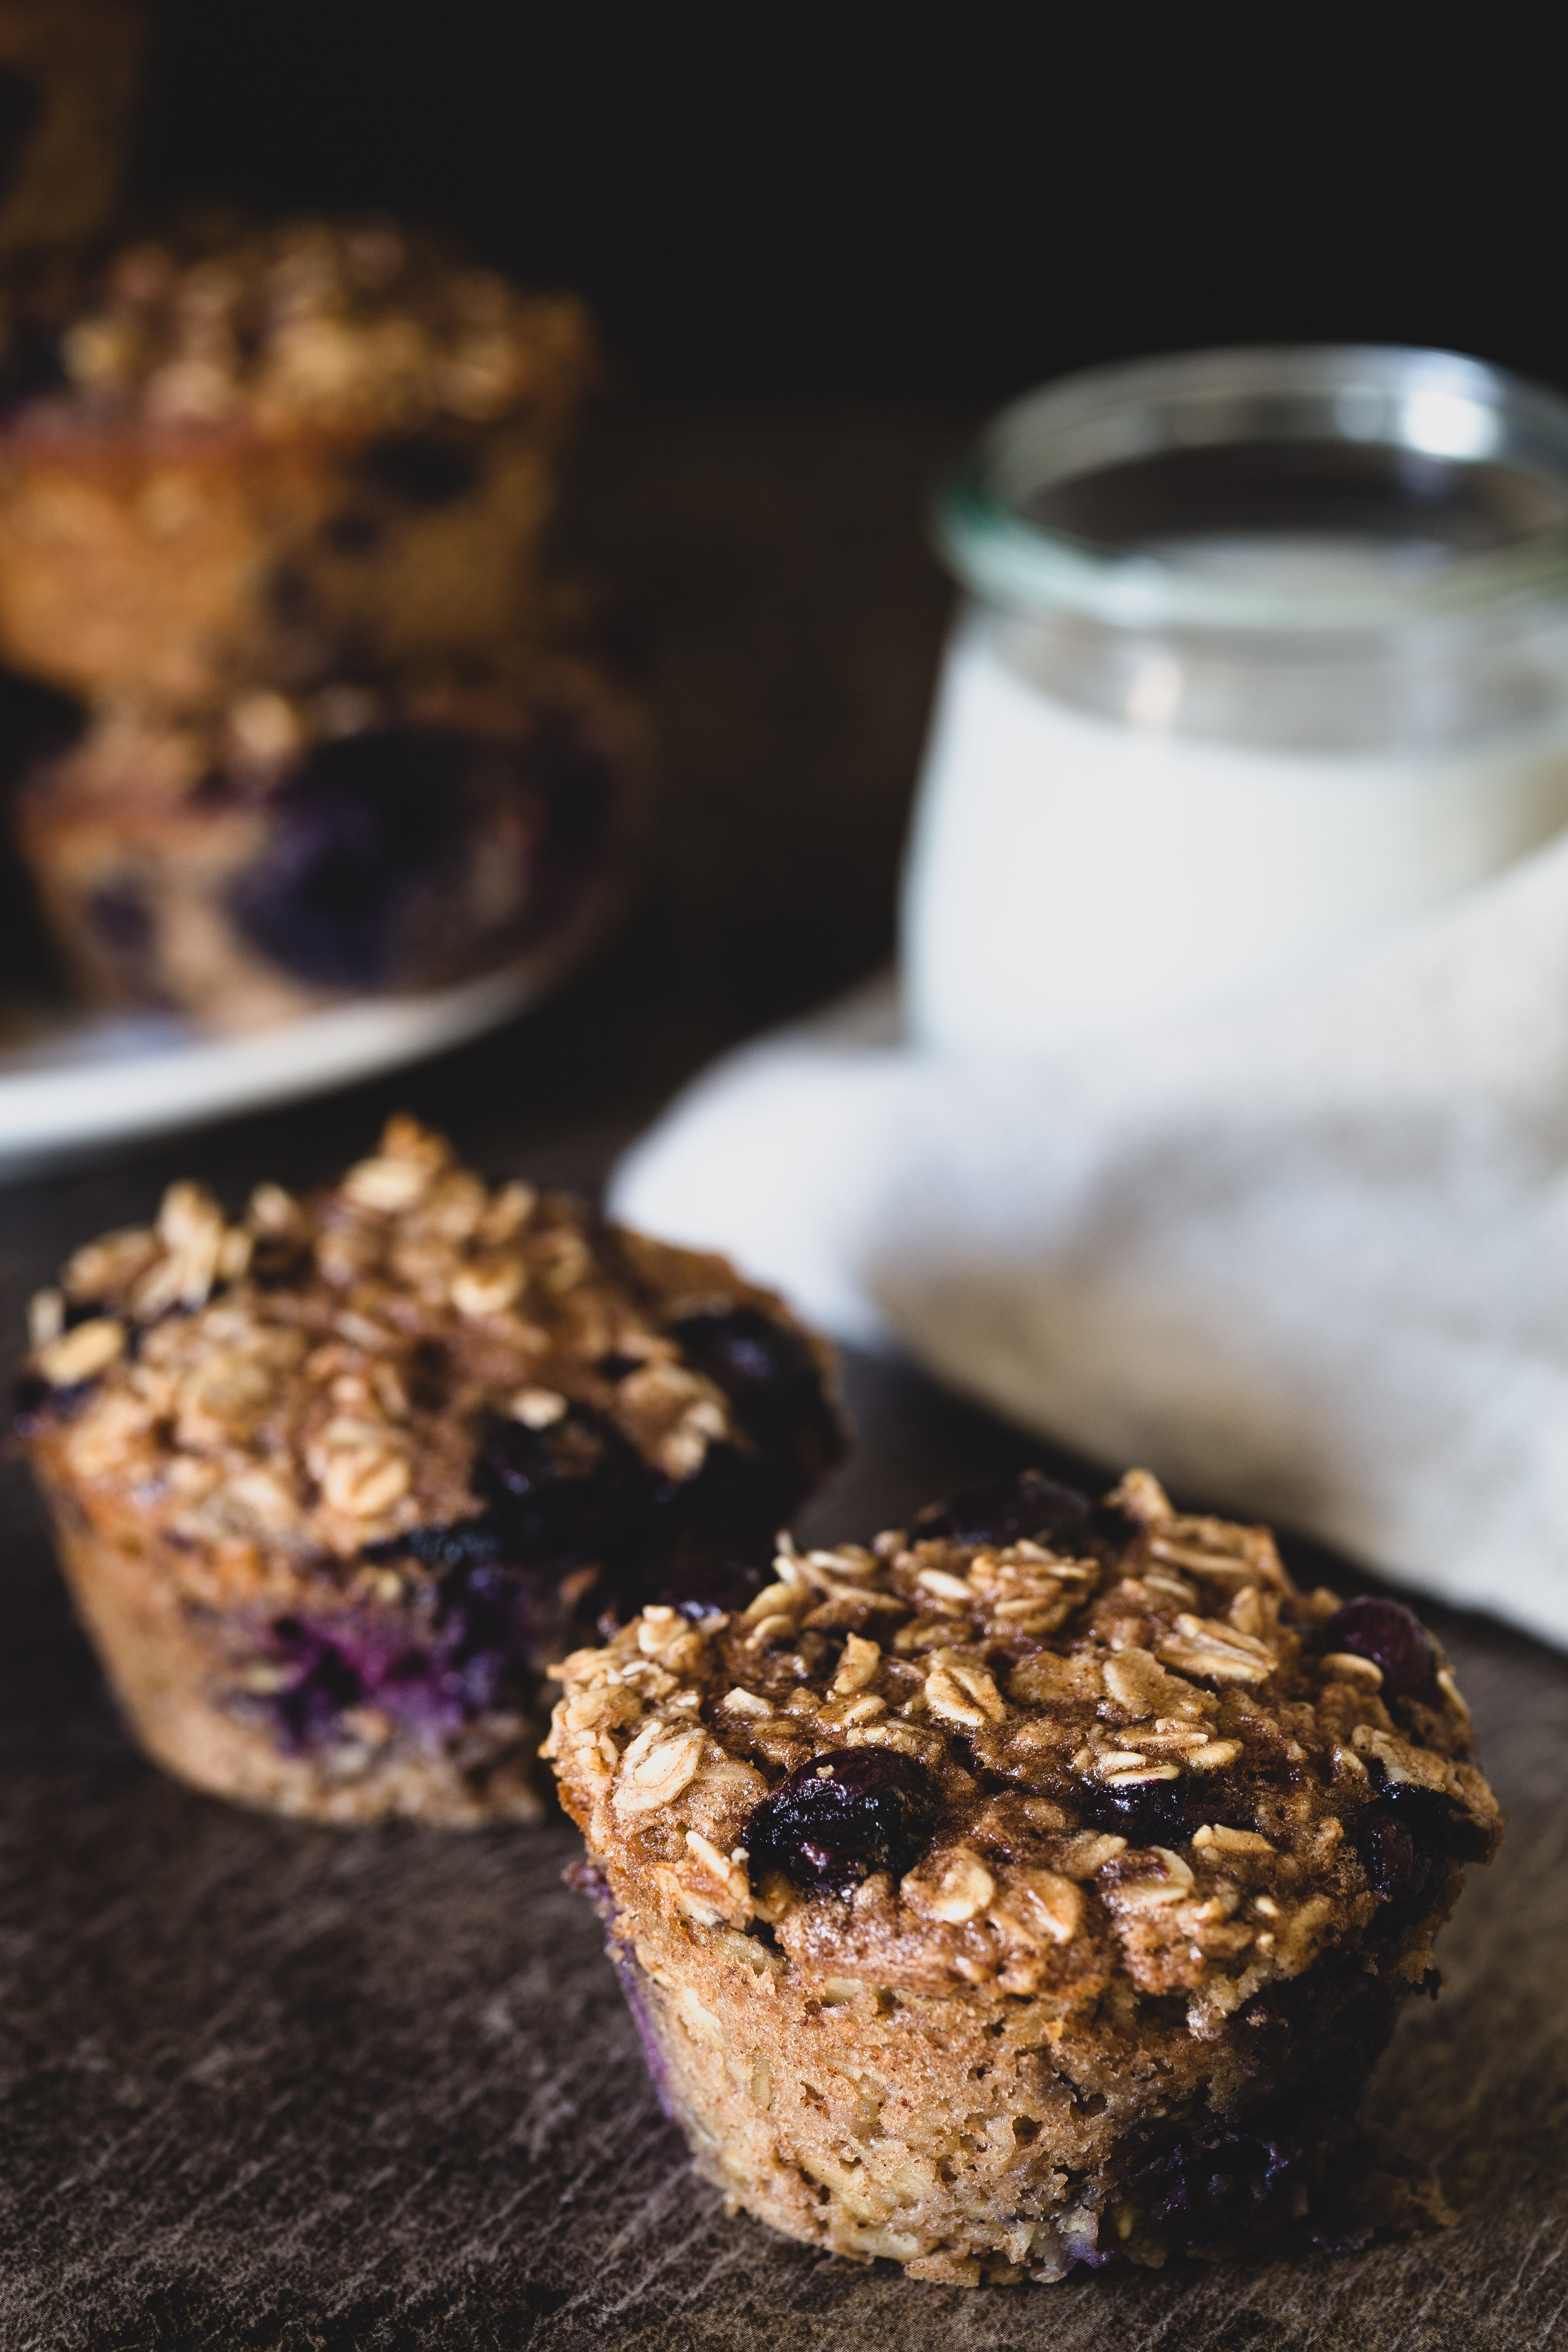 High protein baked blueberry oatmeal cups | Eat Good 4 Life